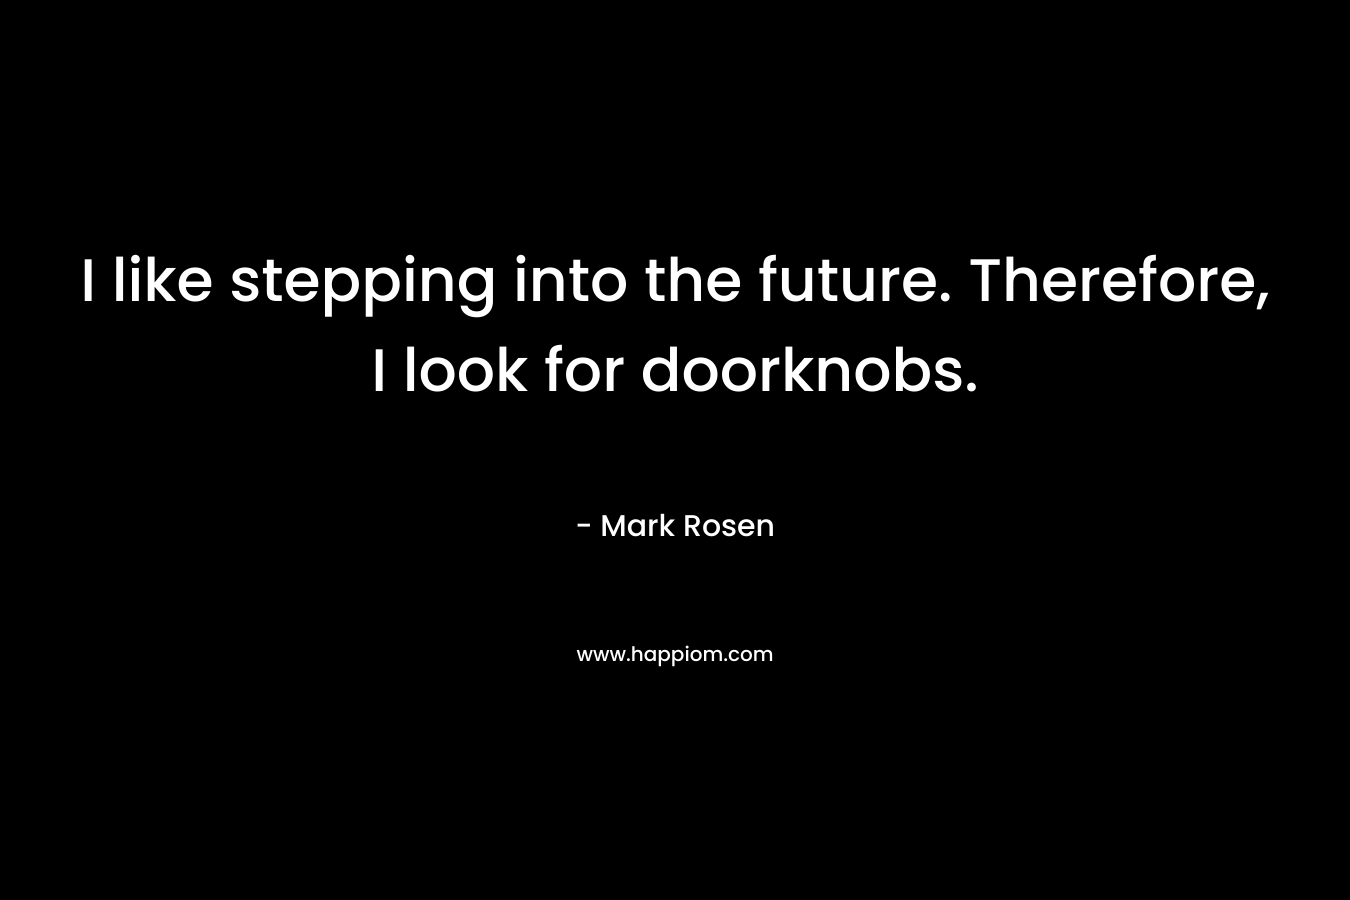 I like stepping into the future. Therefore, I look for doorknobs.